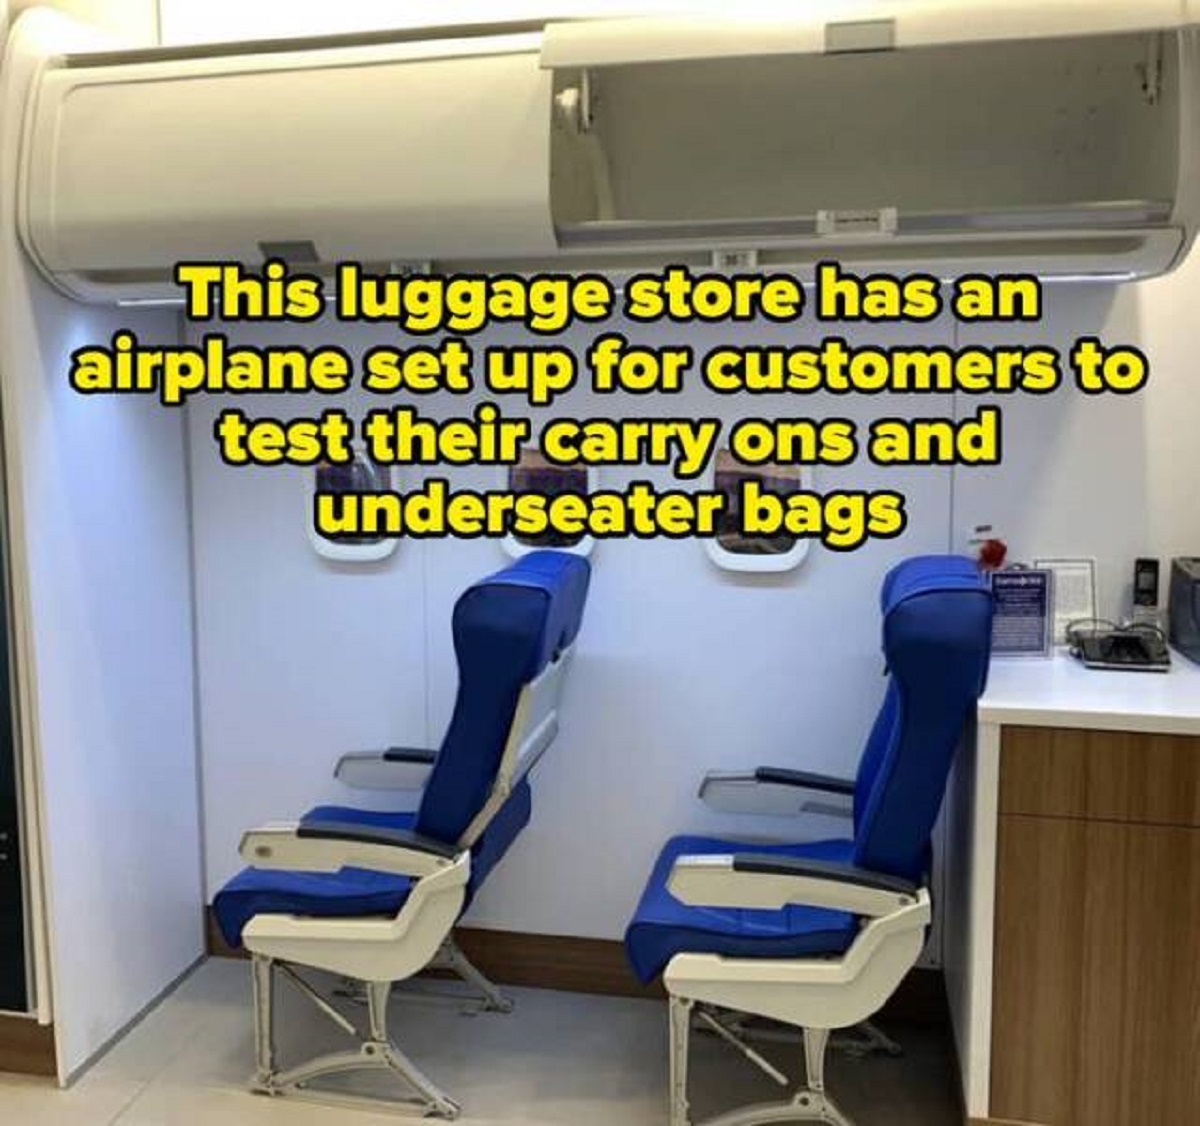 chair - This luggage store has an airplane set up for customers to test their carry ons and underseater bags